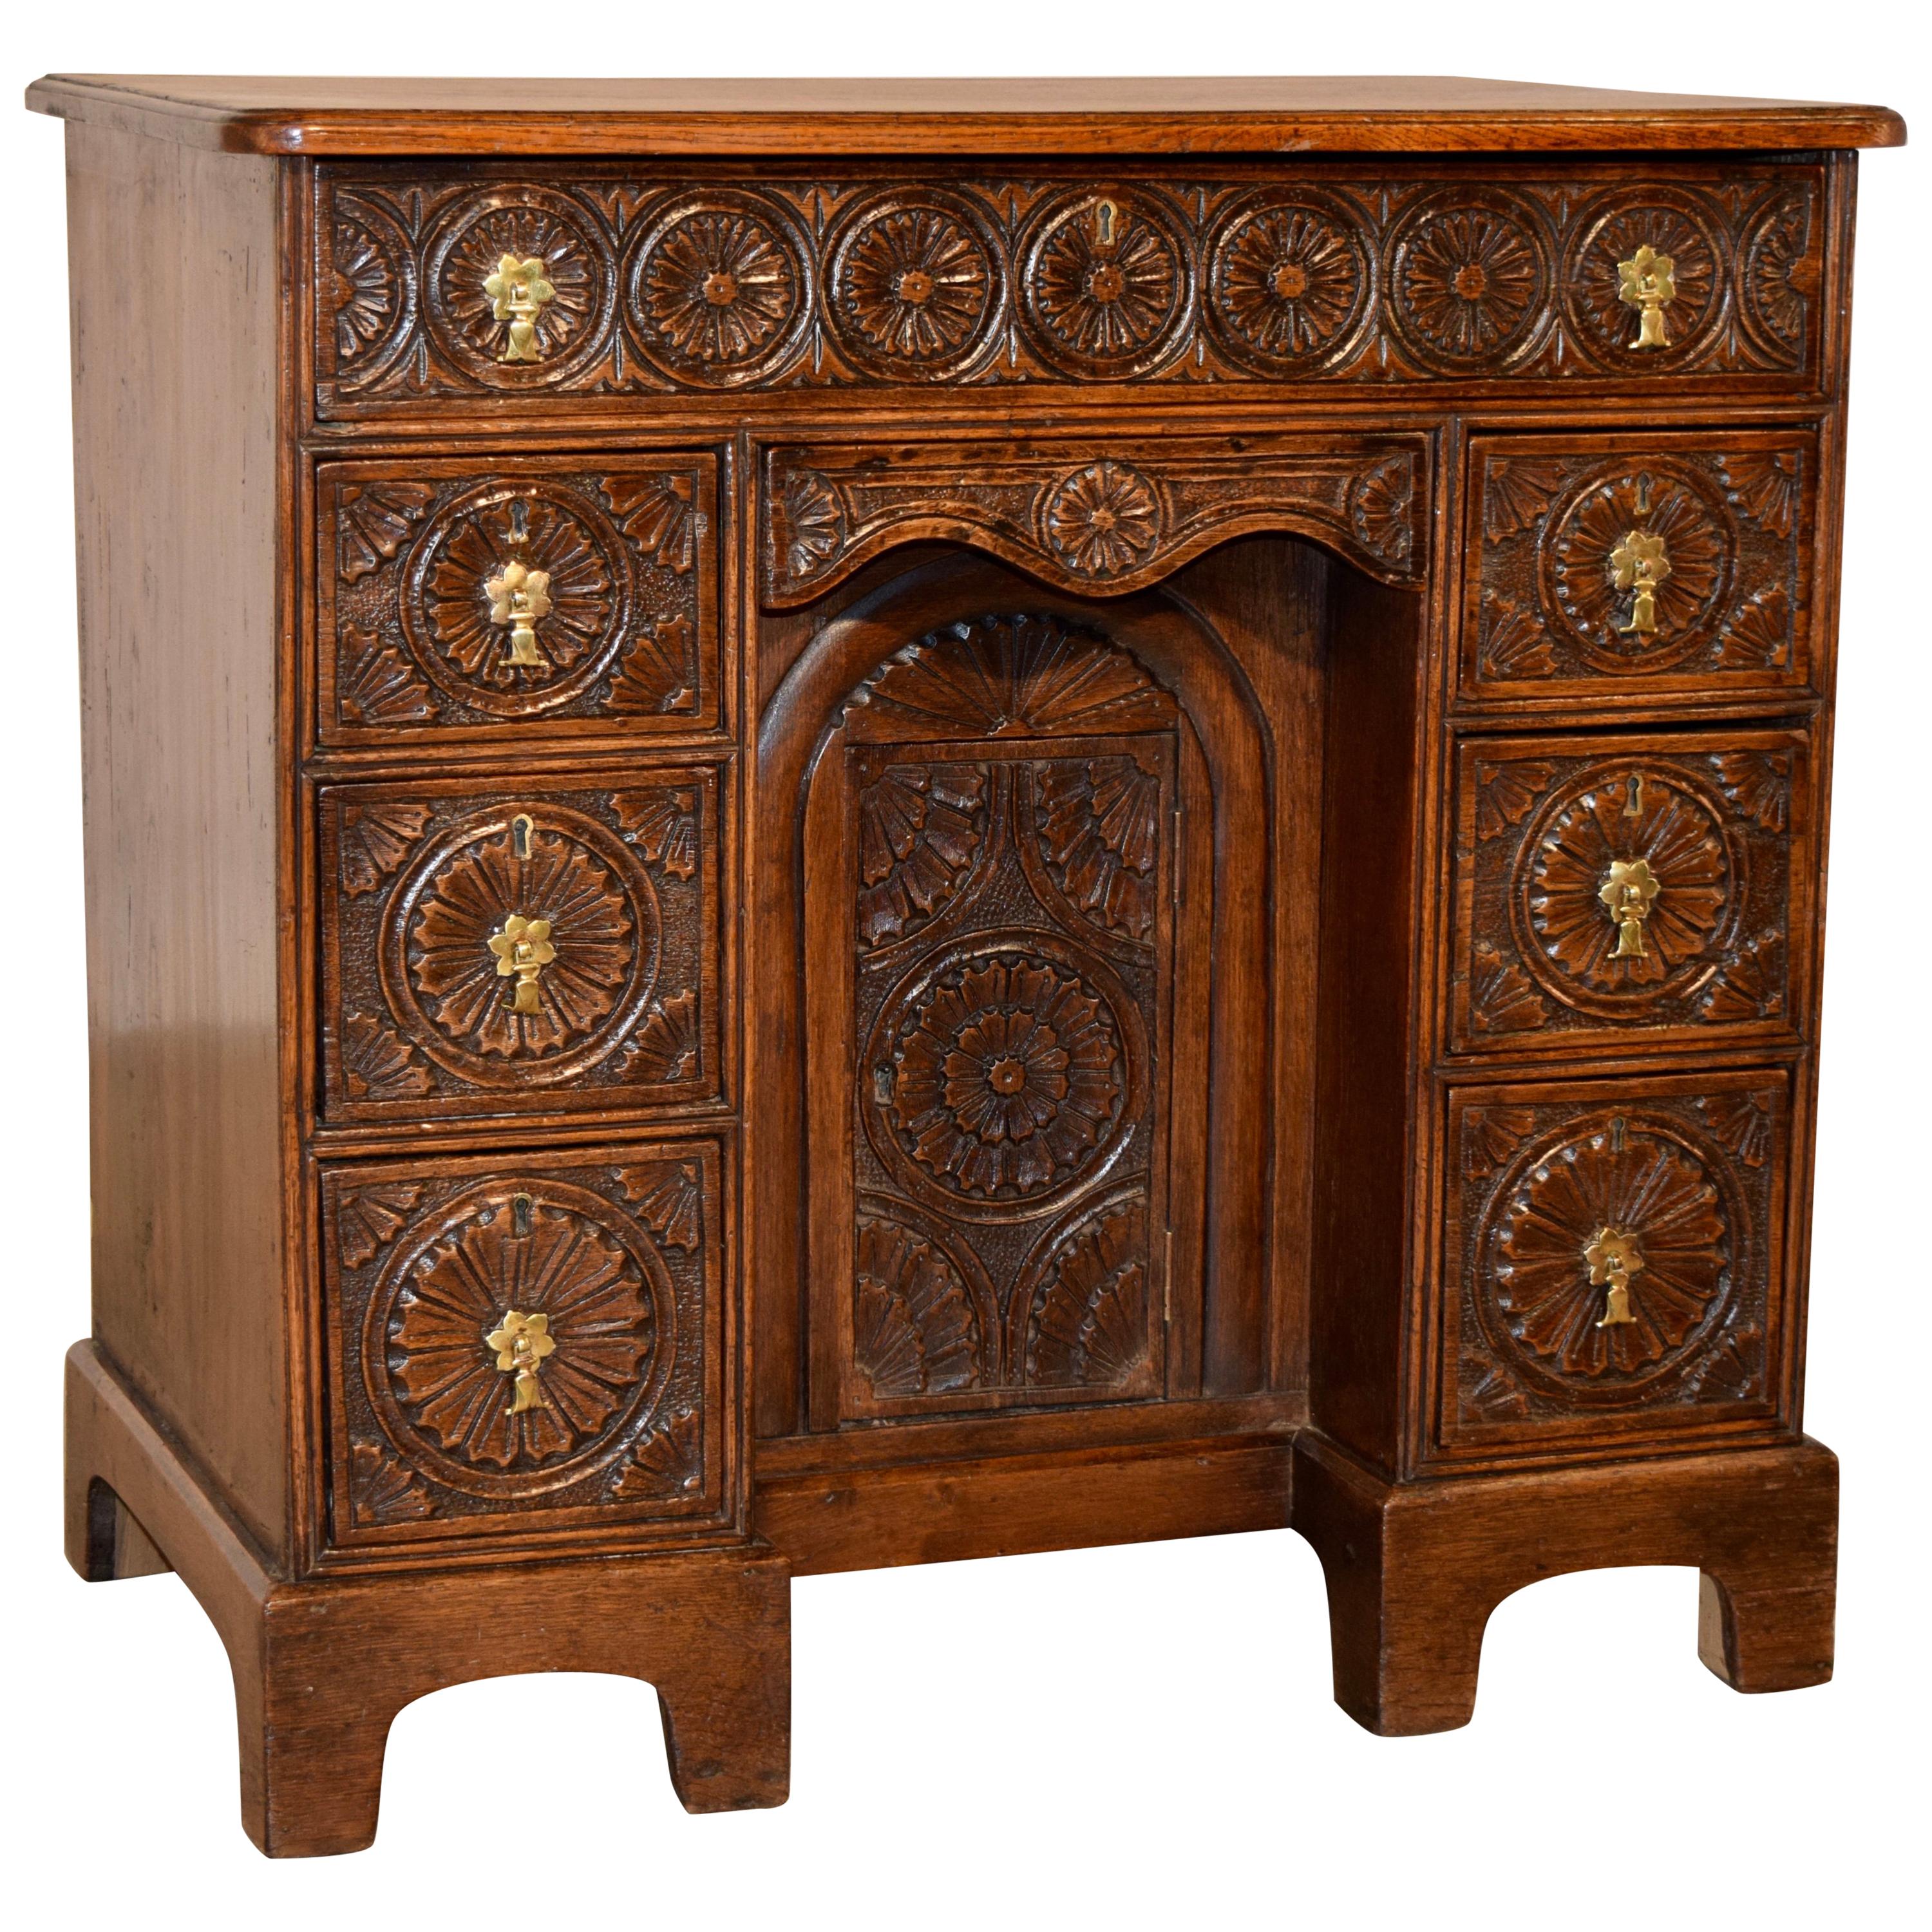 19th Century English Knee Hole Desk For Sale